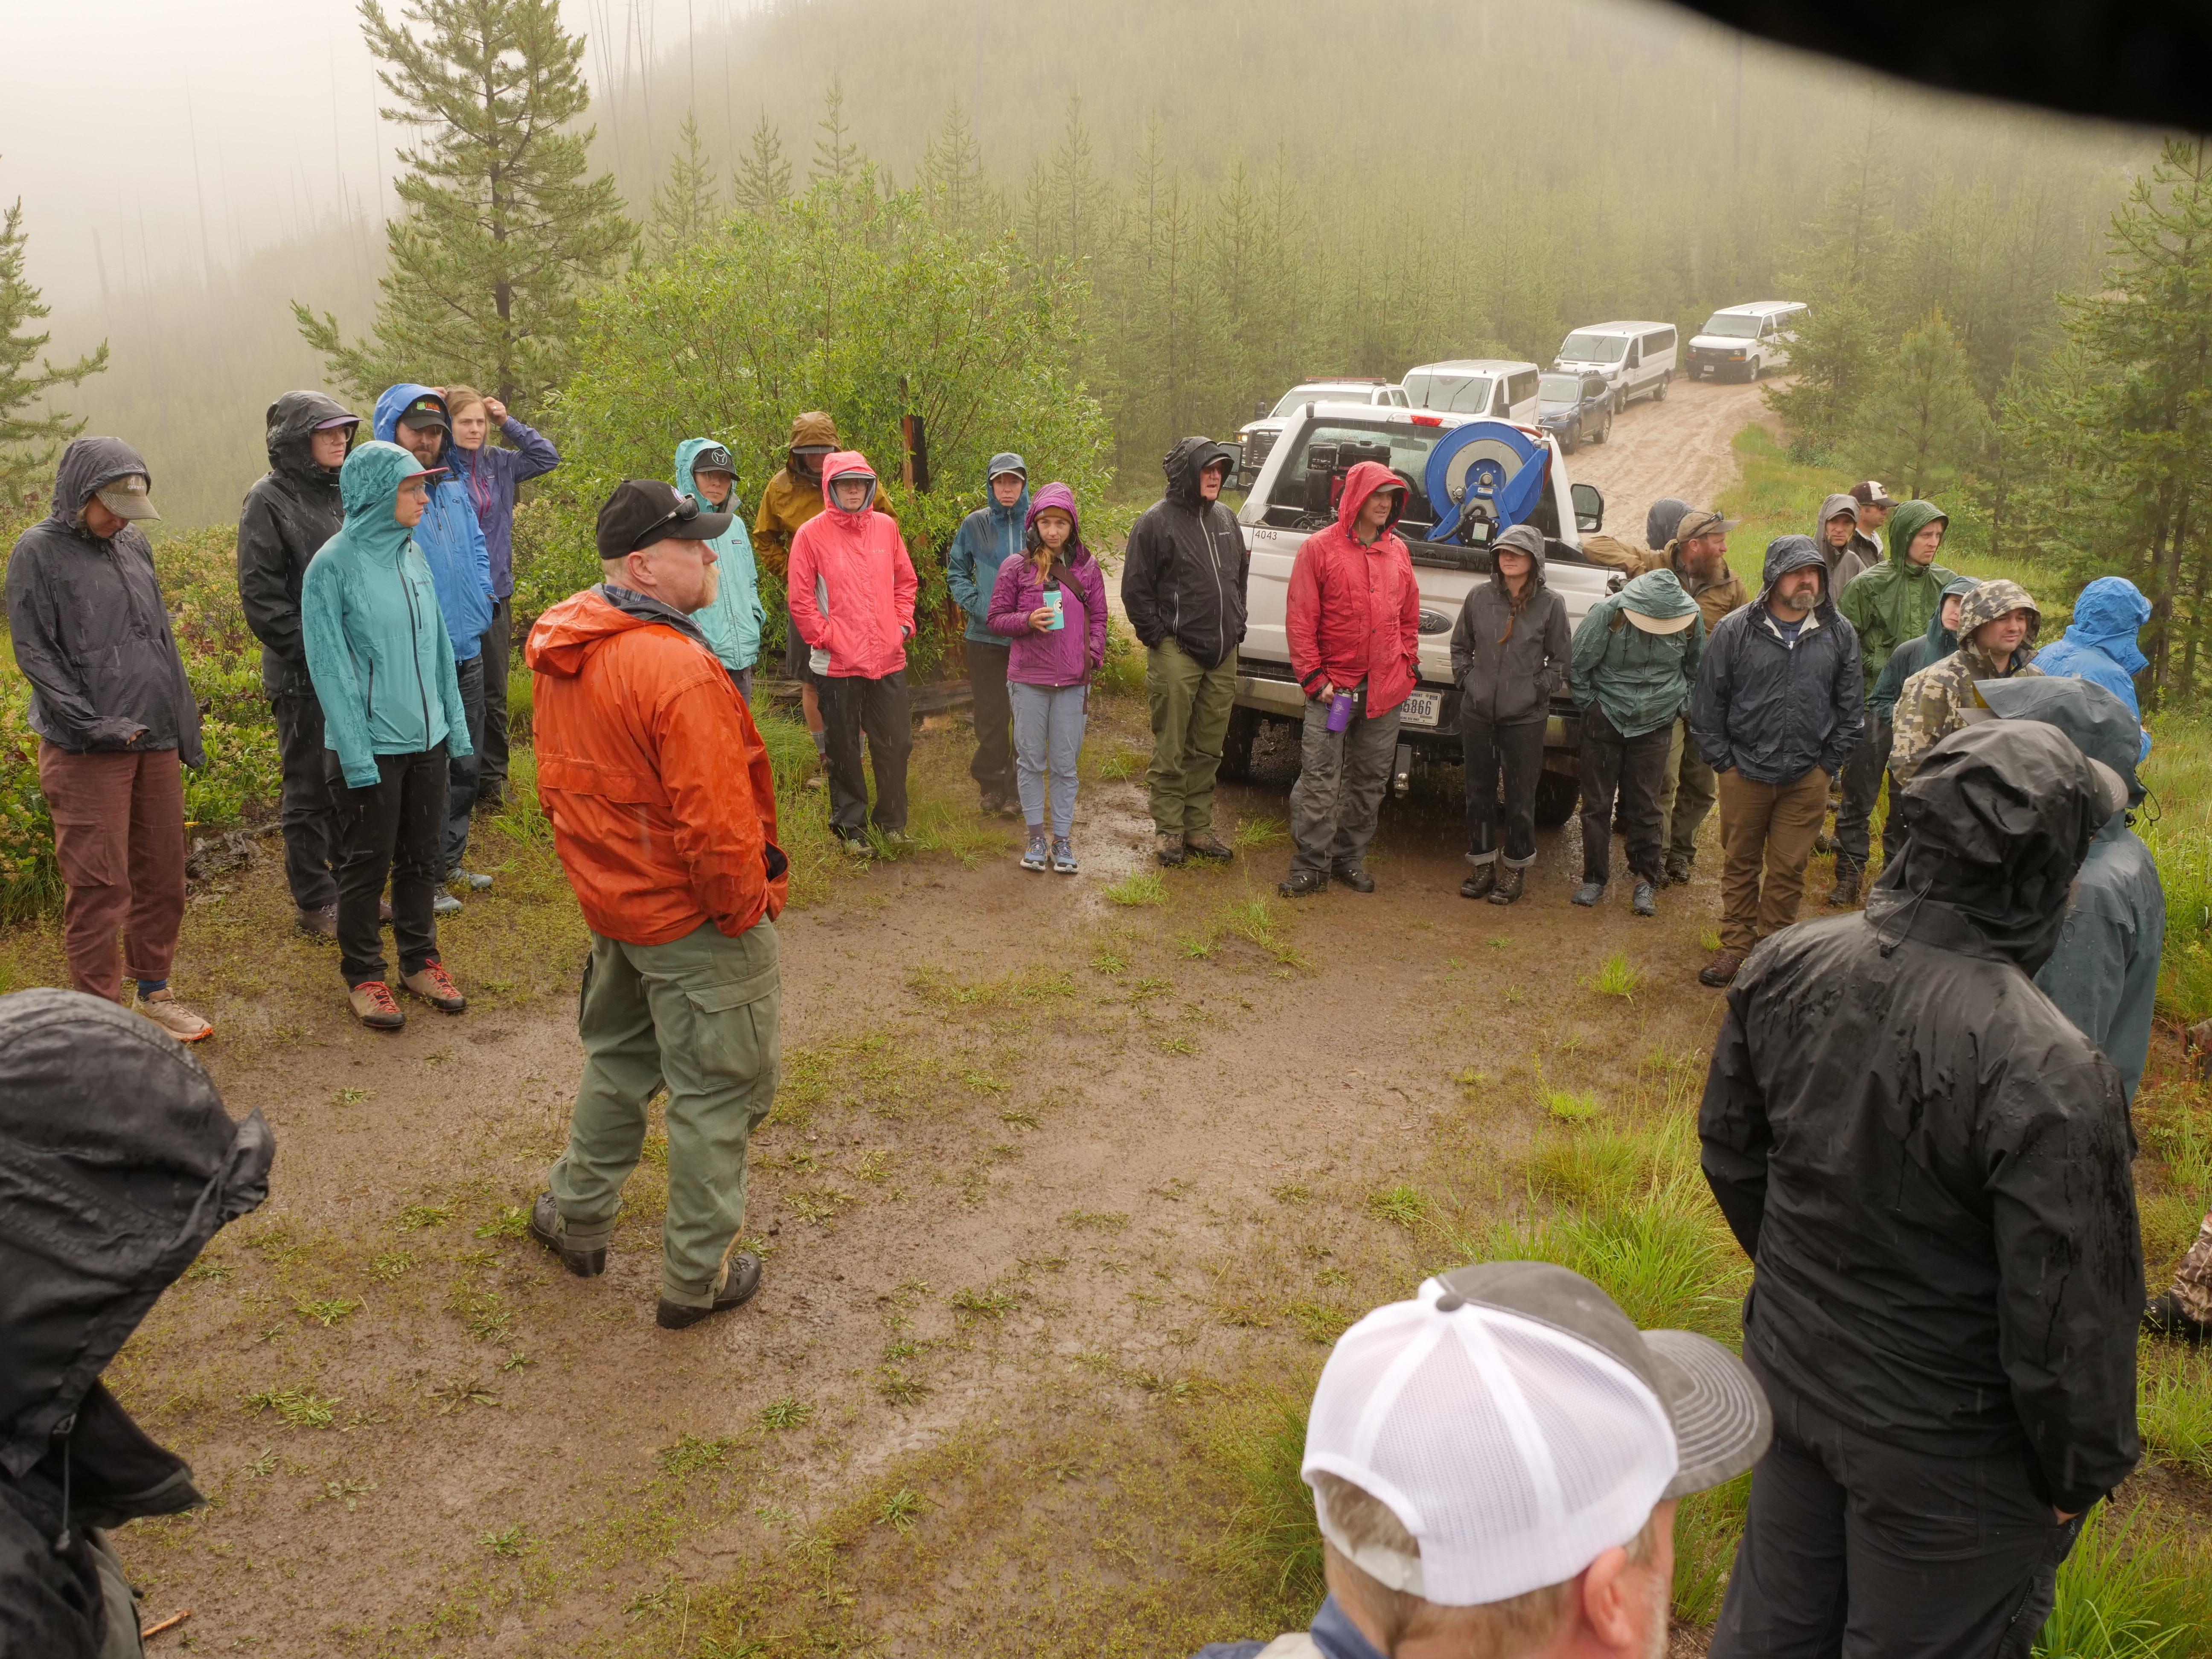 People in rain jackets and hoods standing in a circle on a dirt road in a coniferous forest